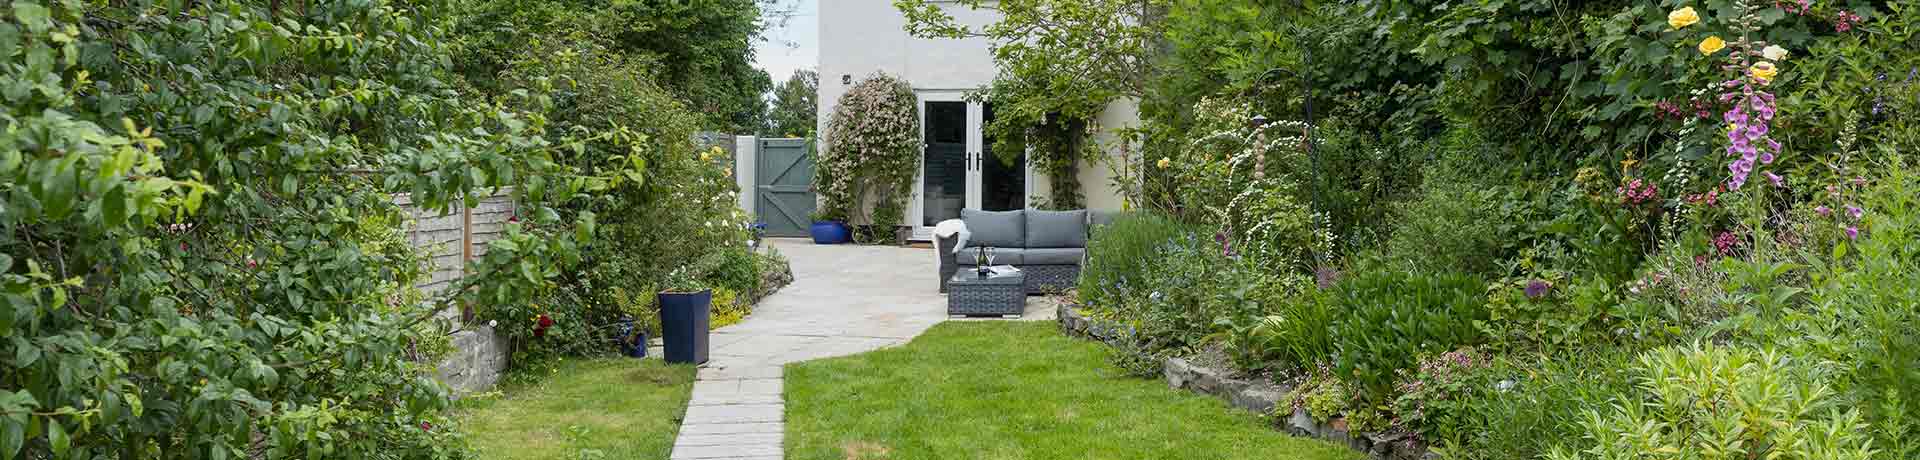 Dog friendly cottages in South Cornwall with an enclosed garden.